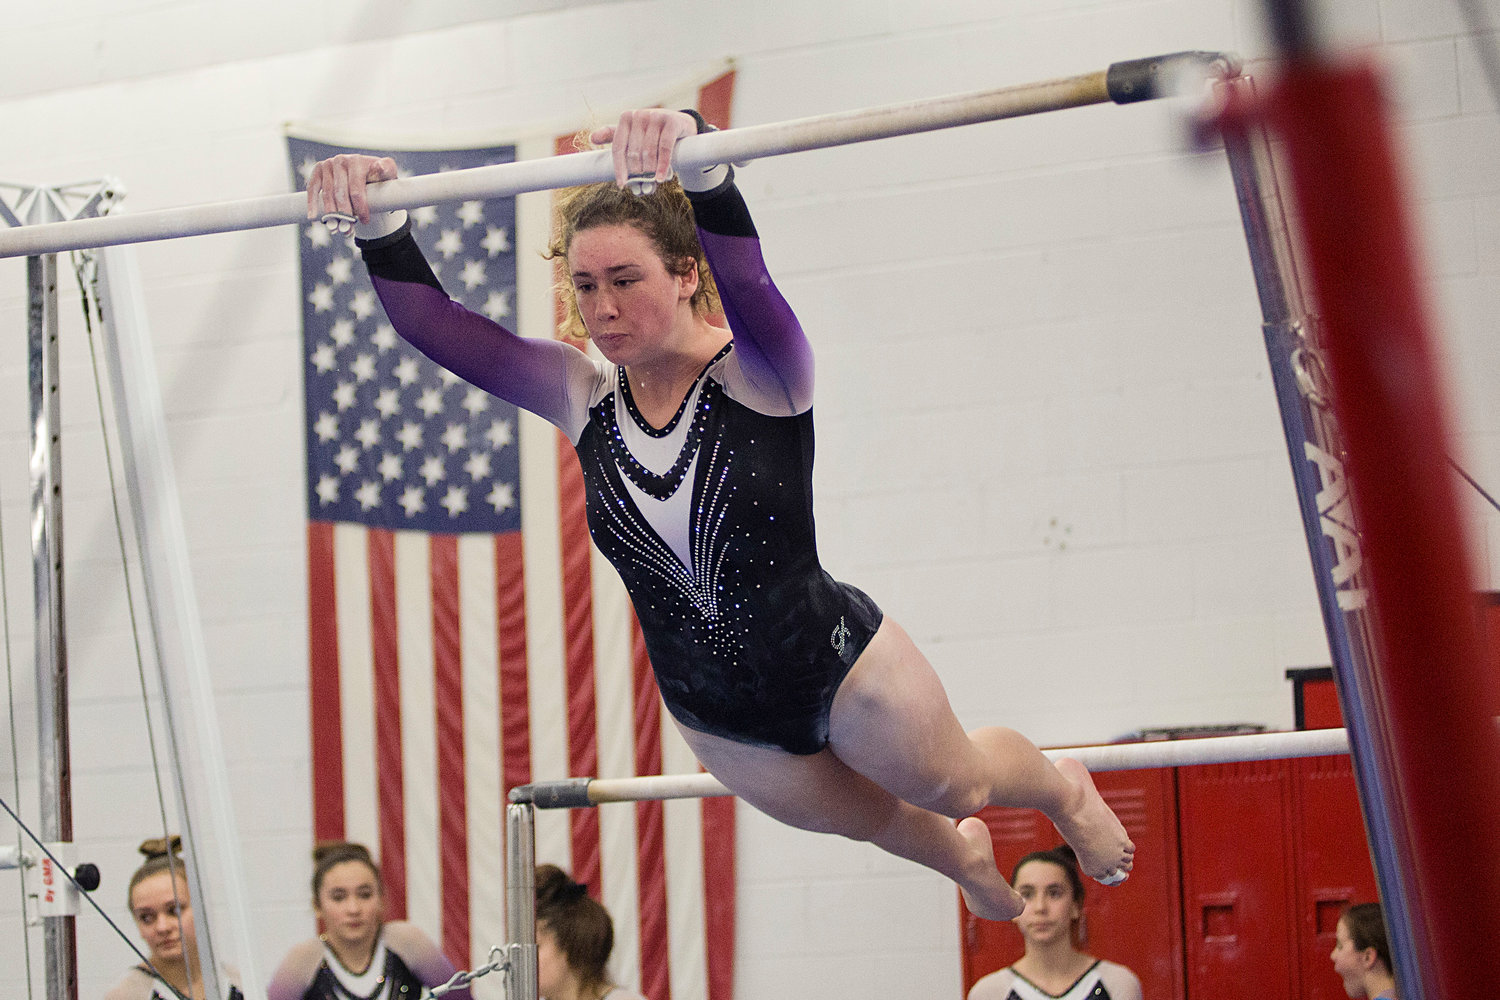 Senior Molly Thibaudeau extends to the high bar while performing
her routine during a home meet against South Kingston, Tuesday, January
21st.